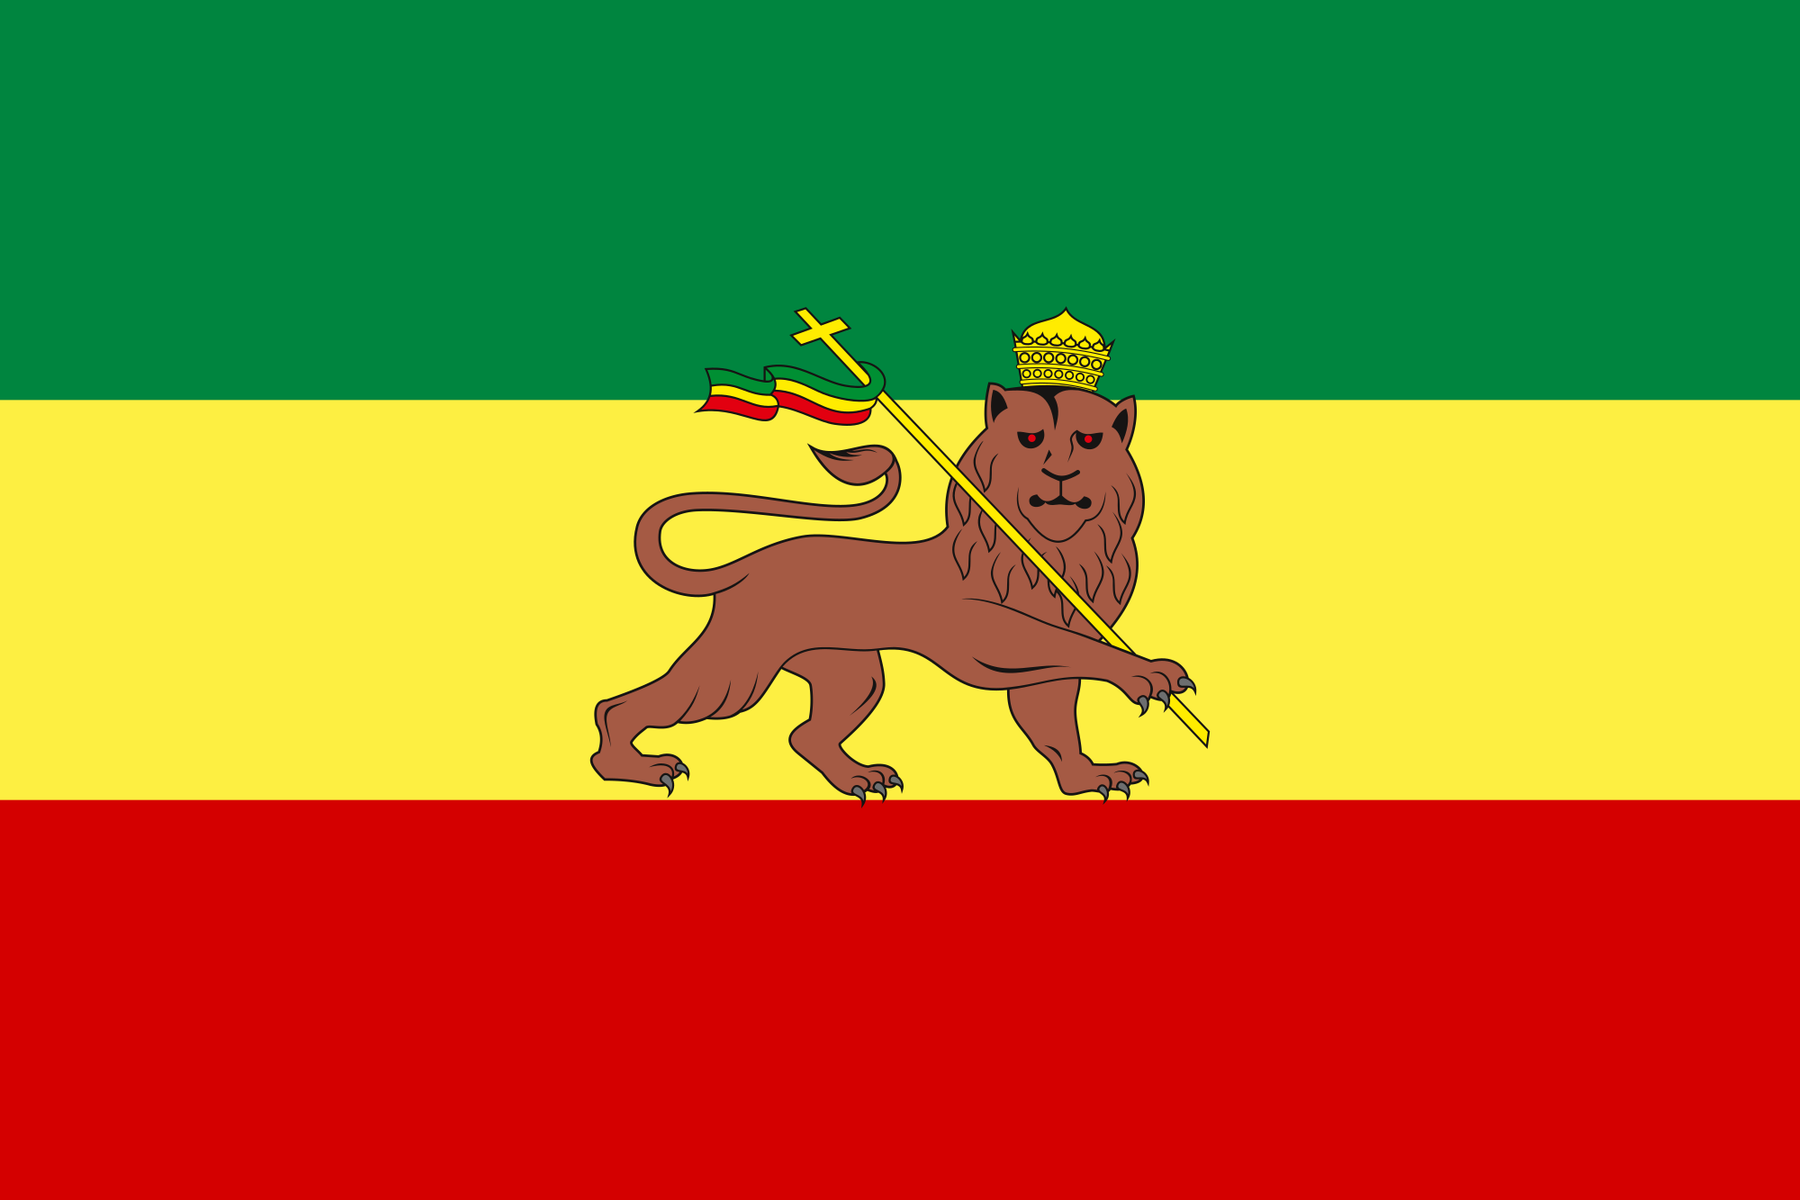 Ethiopia - Biblical land of the lion